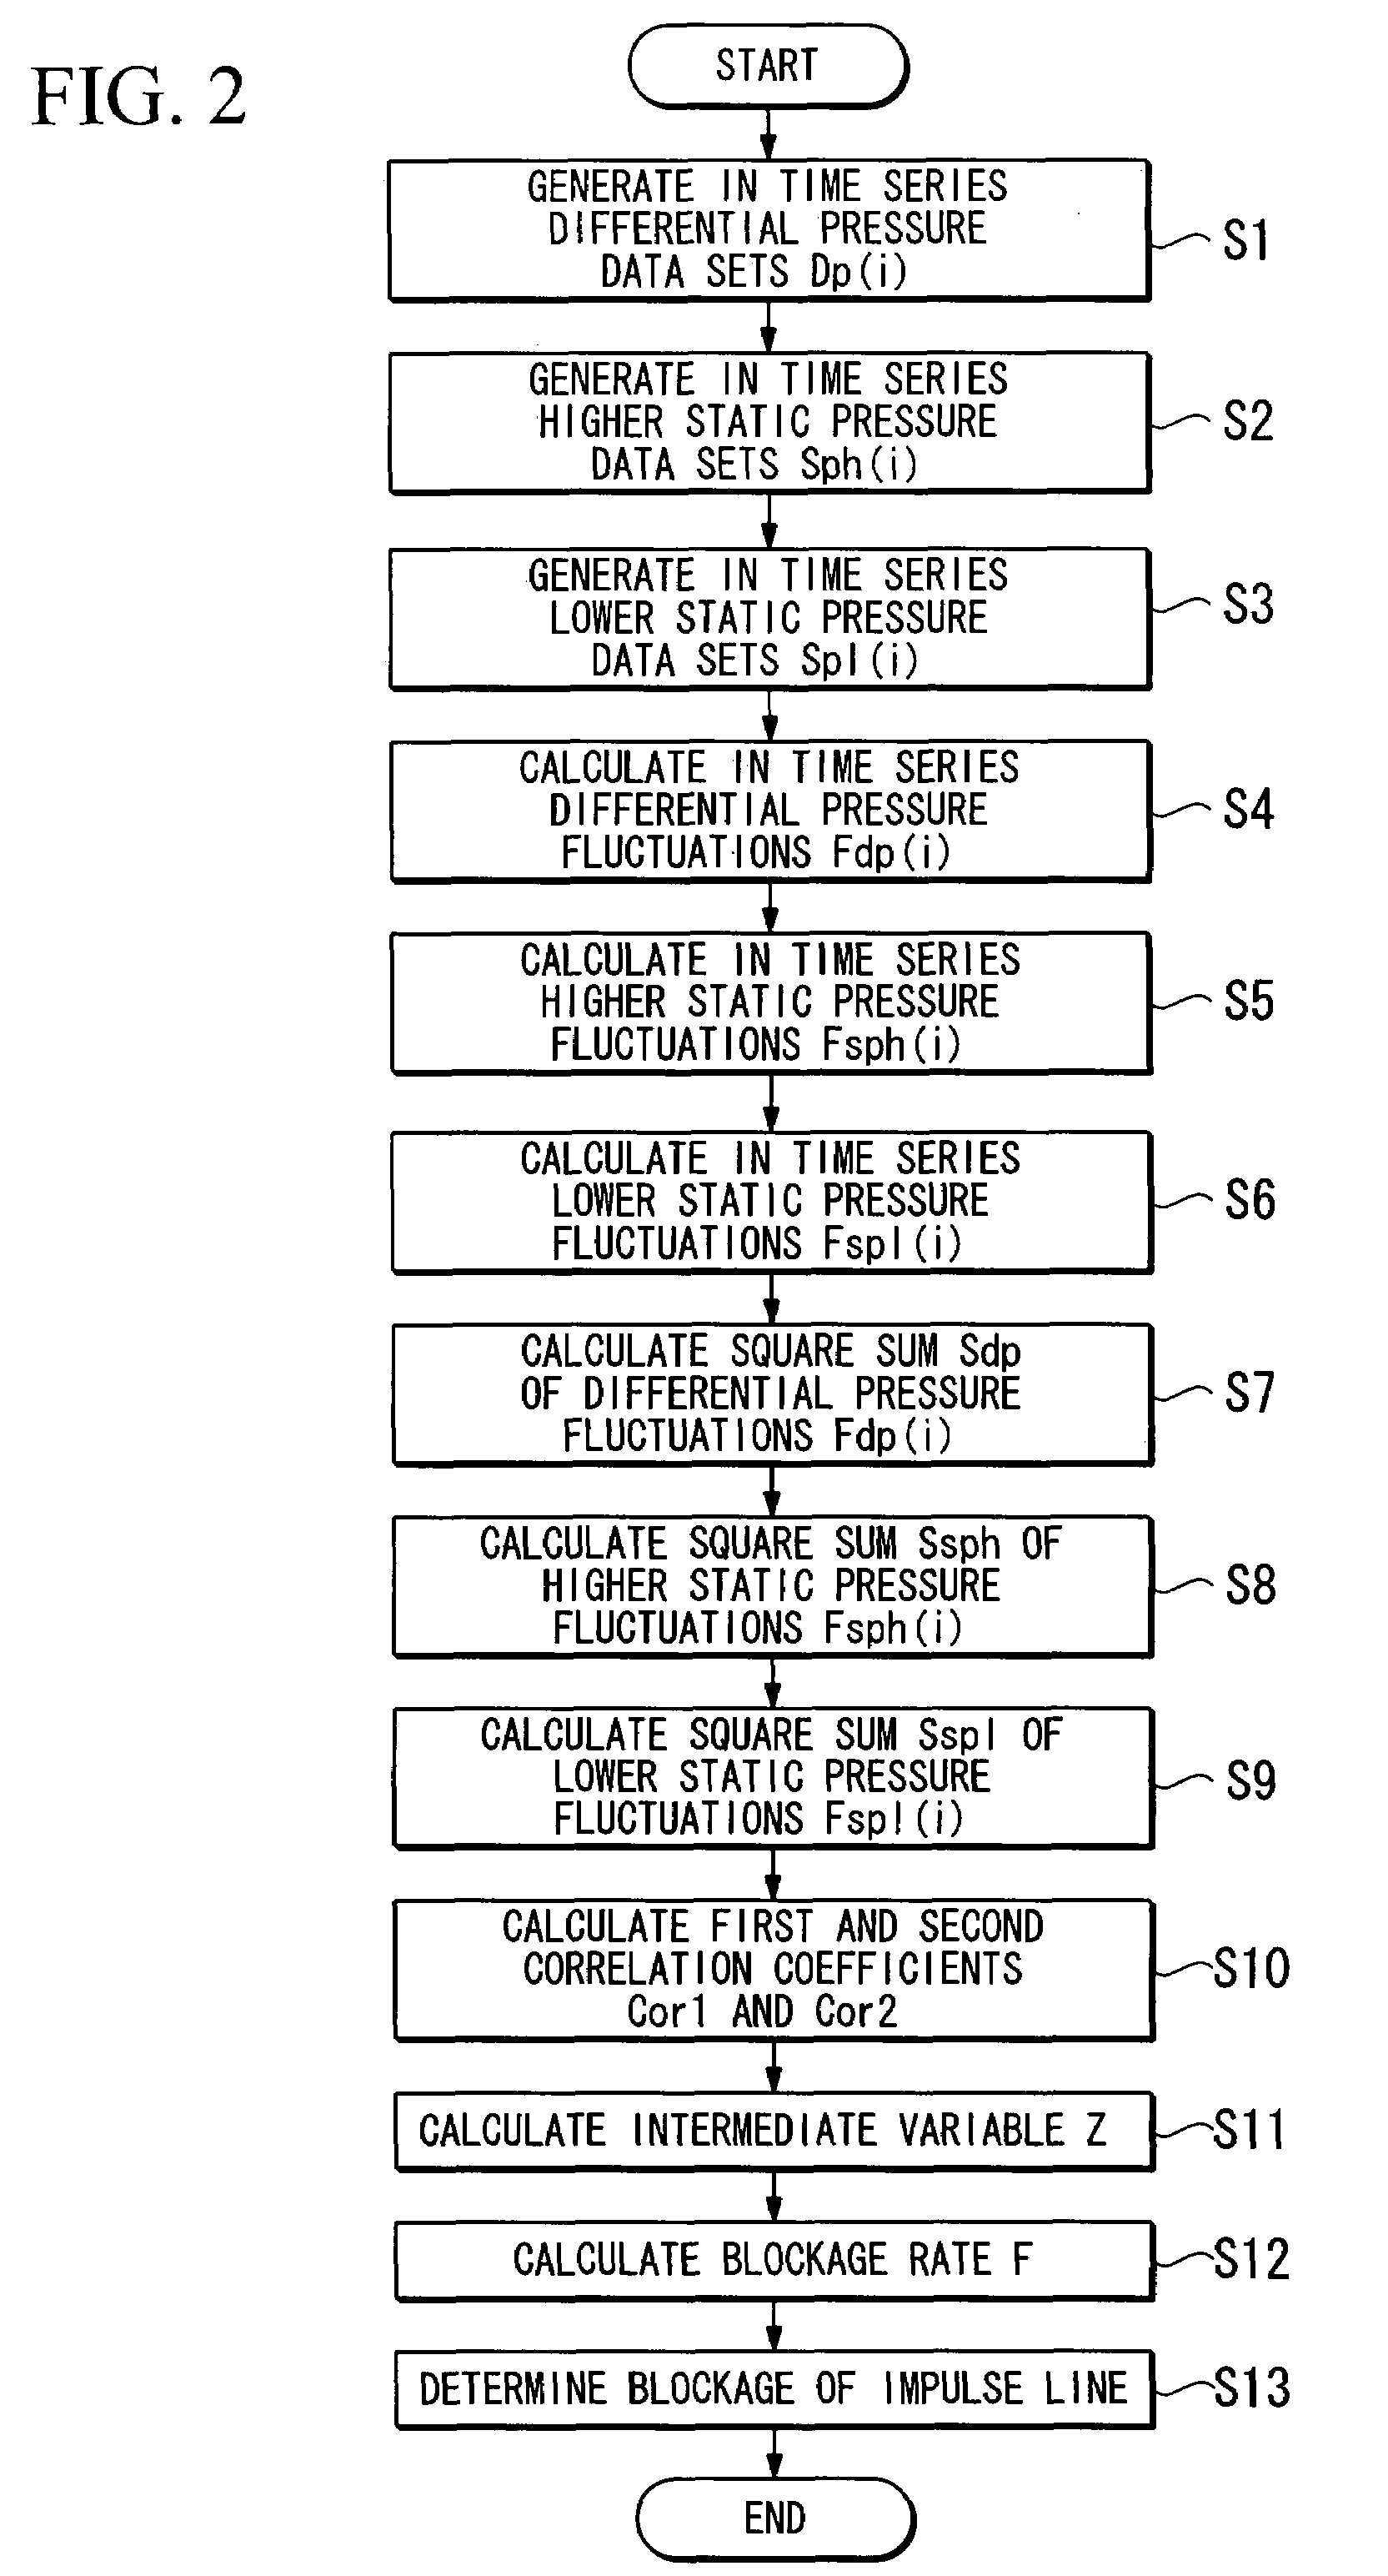 Apparatus and method for detecting blockage of impulse lines